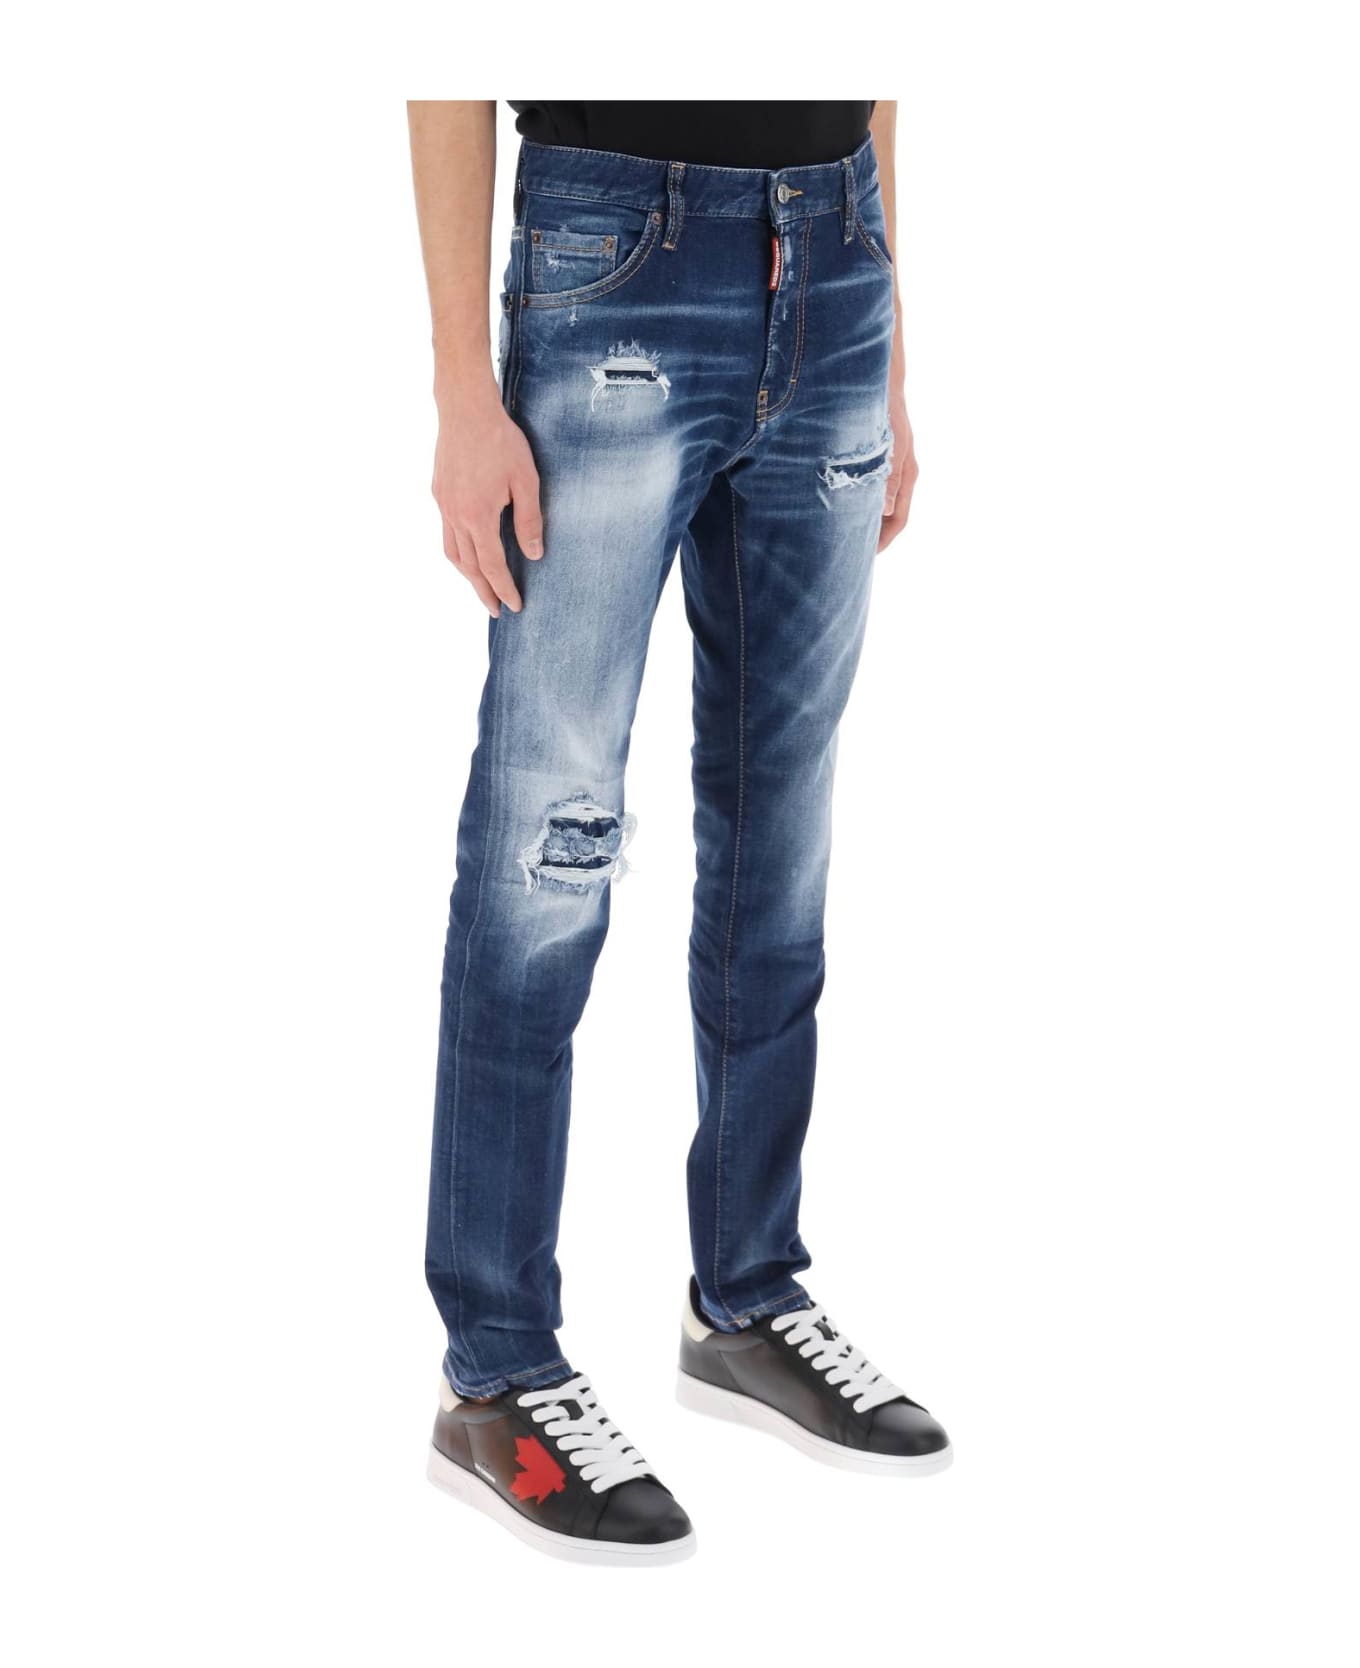 Dsquared2 Cool Guy Jeans In Medium Worn Out Booty Wash - NAVY BLUE (Blue)